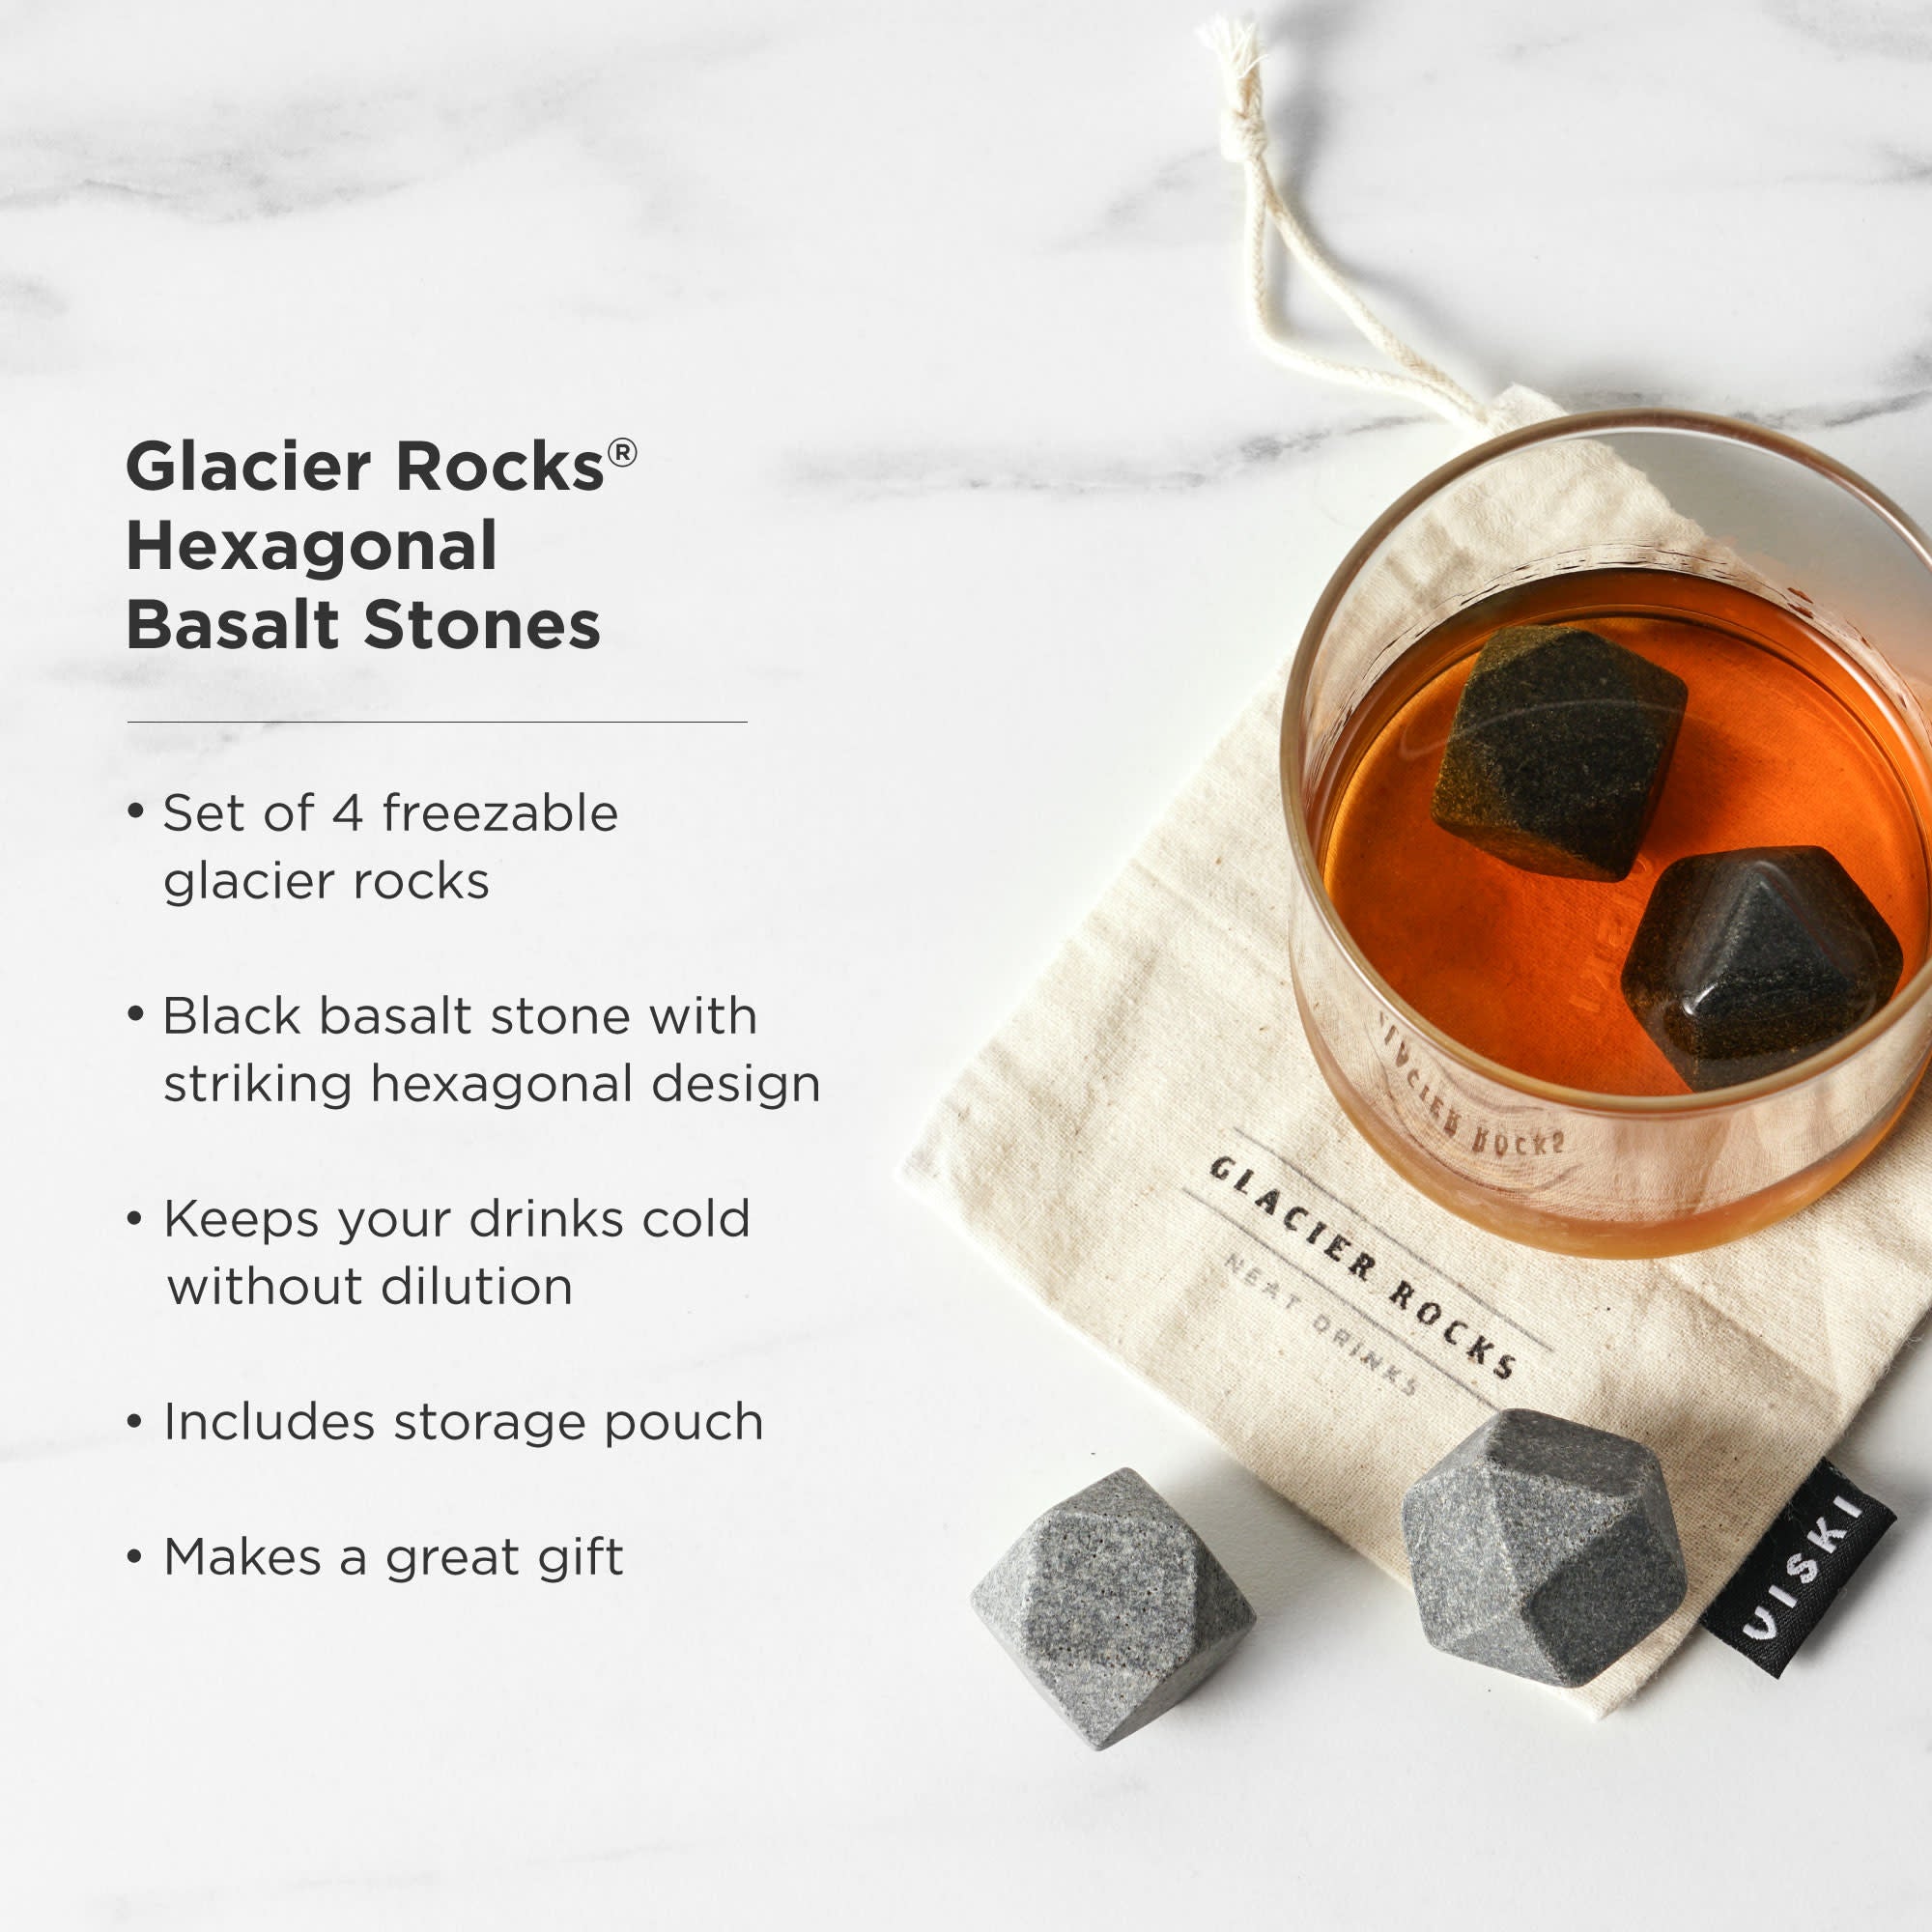 Whisky Stones: Chill your liquor without diluting it.